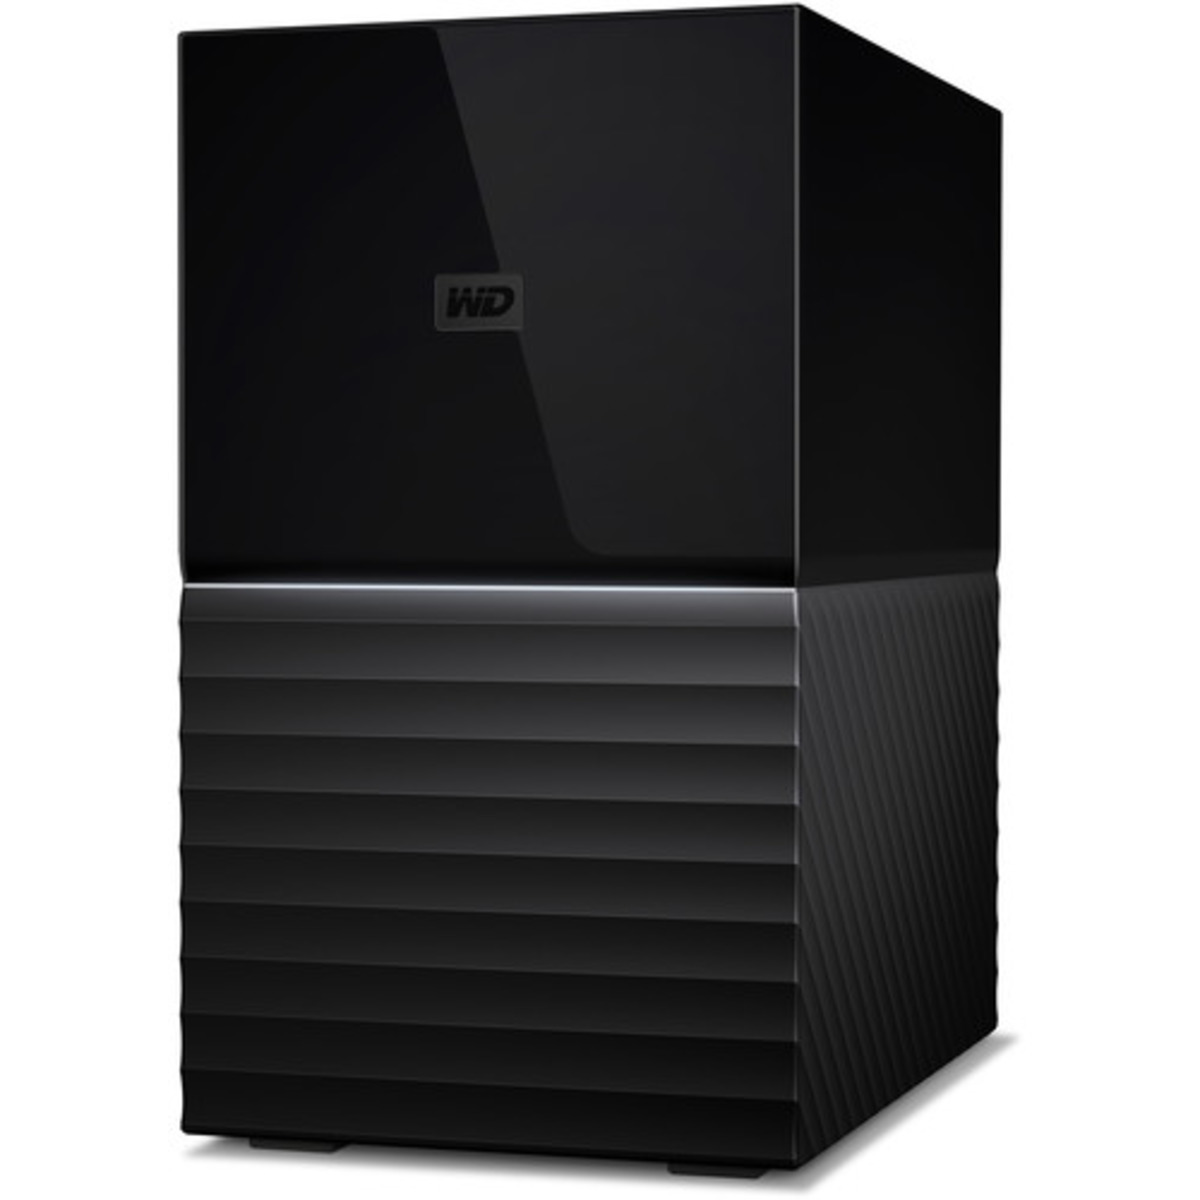 buy $716 Western Digital My Book DUO Gen 2 12tb Desktop DAS - Direct Attached Storage Device 2x6000gb Western Digital Ultrastar DC HC310 HUS726T6TALE6L4 3.5 7200rpm SATA 6Gb/s HDD ENTERPRISE Class Drives Installed - Burn-In Tested - ON SALE - nas headquarters buy network attached storage server device das new raid-5 free shipping usa christmas new year holiday sale My Book DUO Gen 2